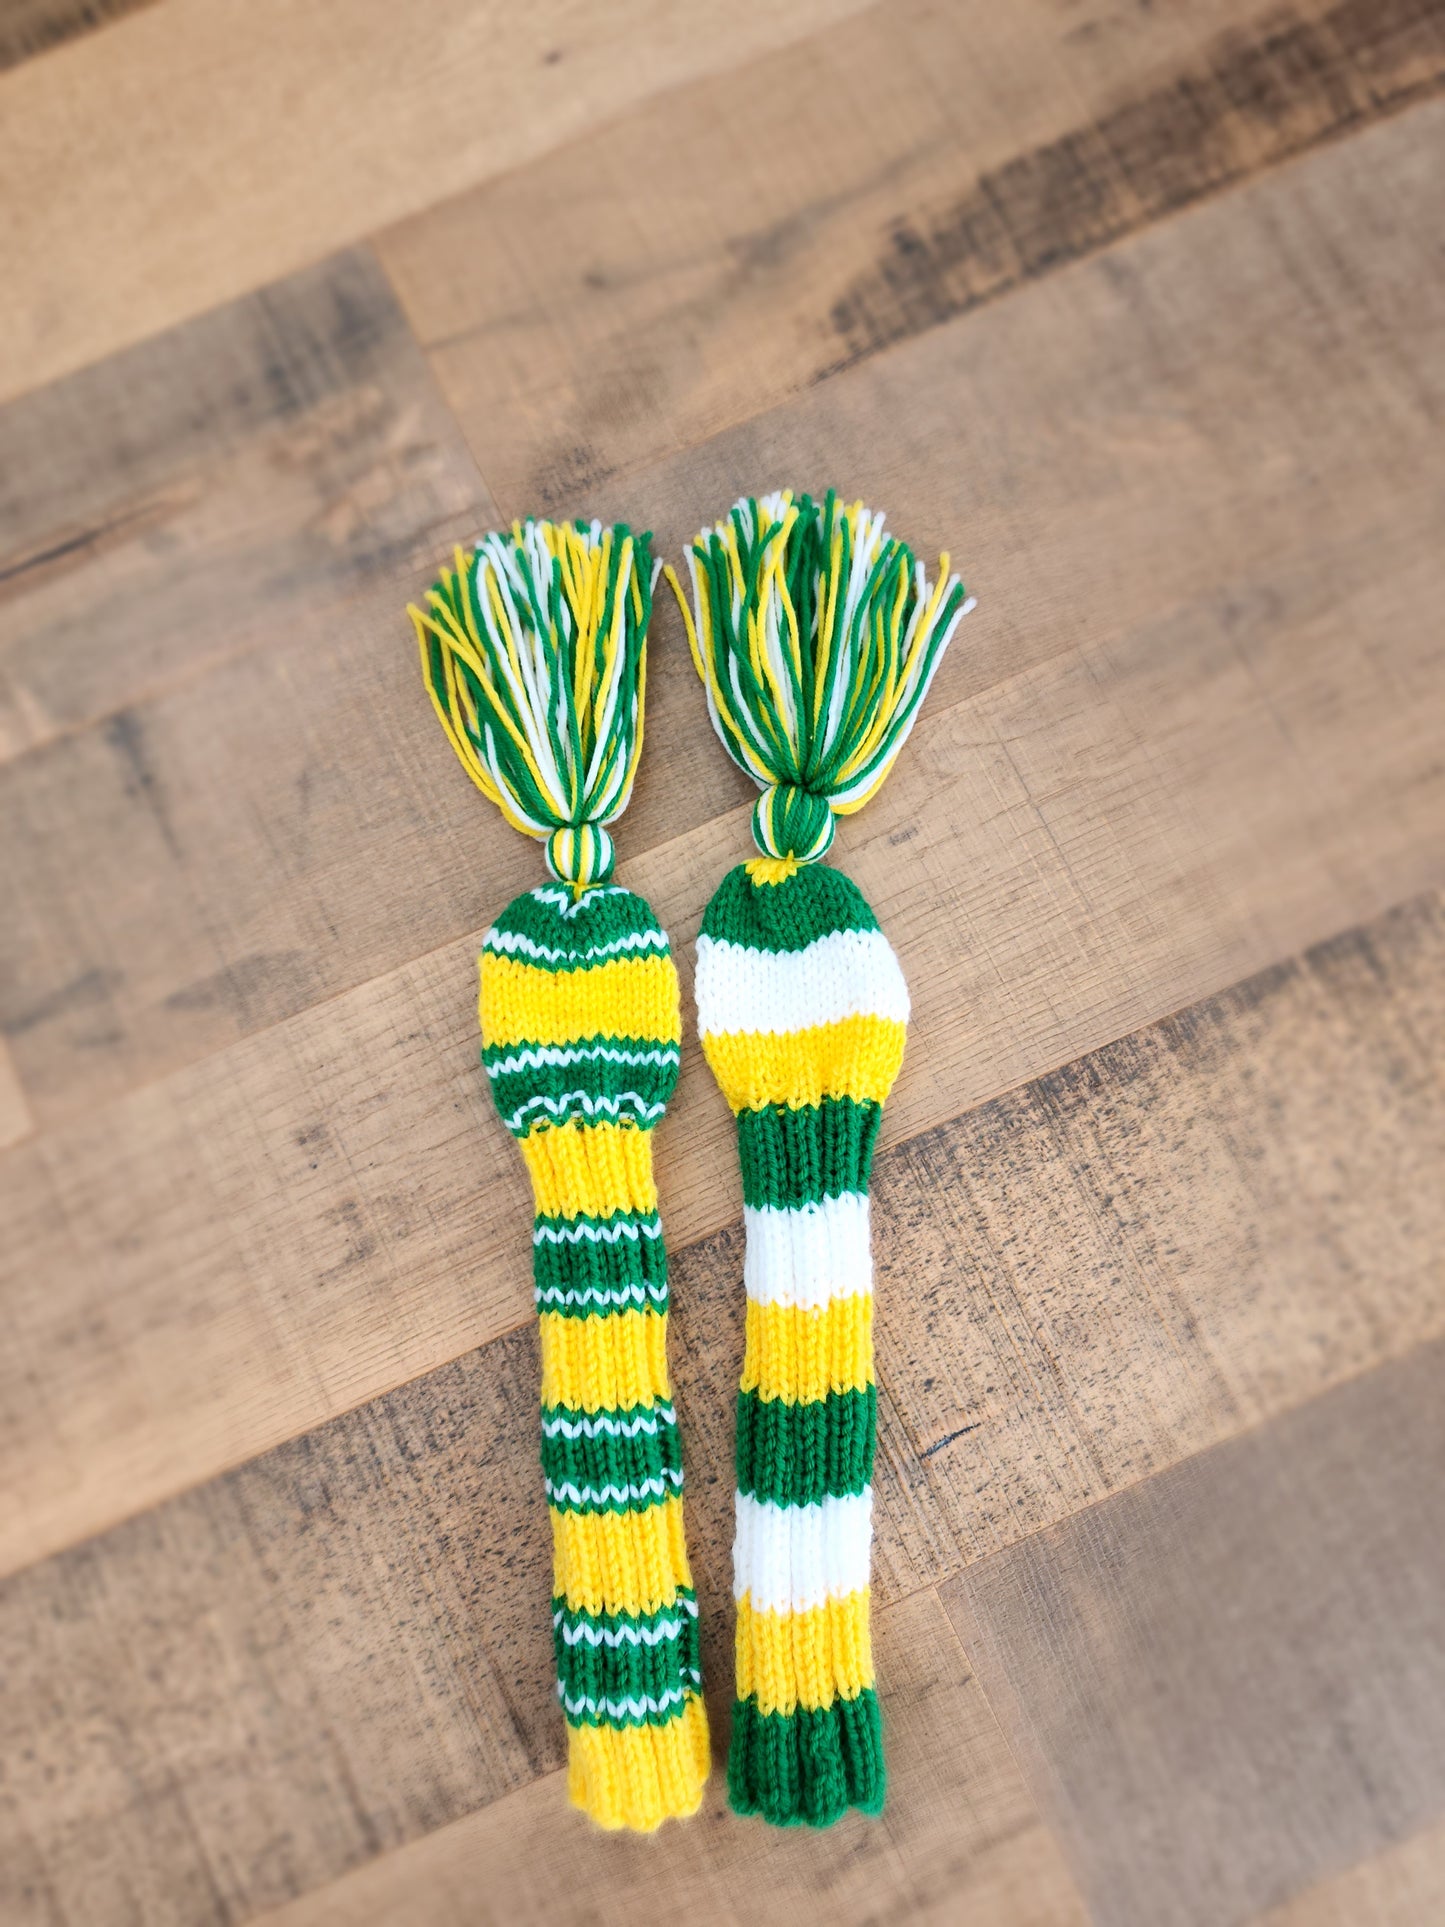 Hand Knit Golf Club Head Covers Retro-Vintage Green, Yellow & White with Tassels for Fairway Woods